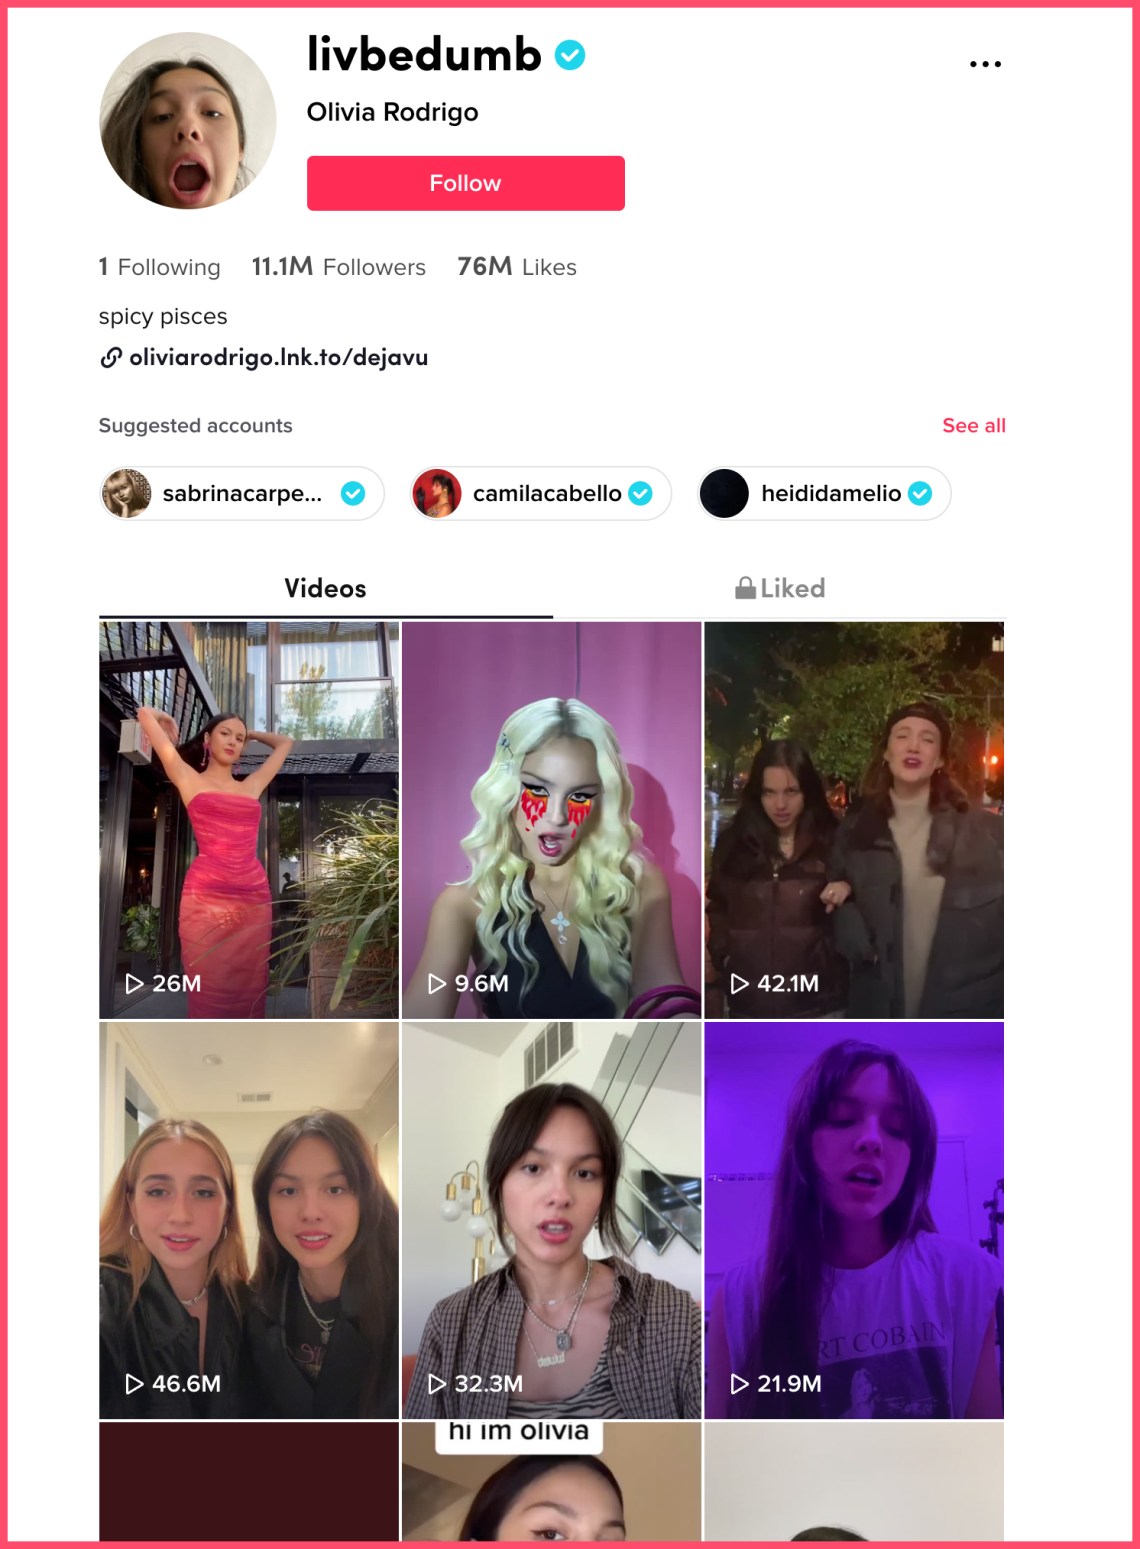 250+ TikTok Usernames That Could Go Viral | Thought Catalog